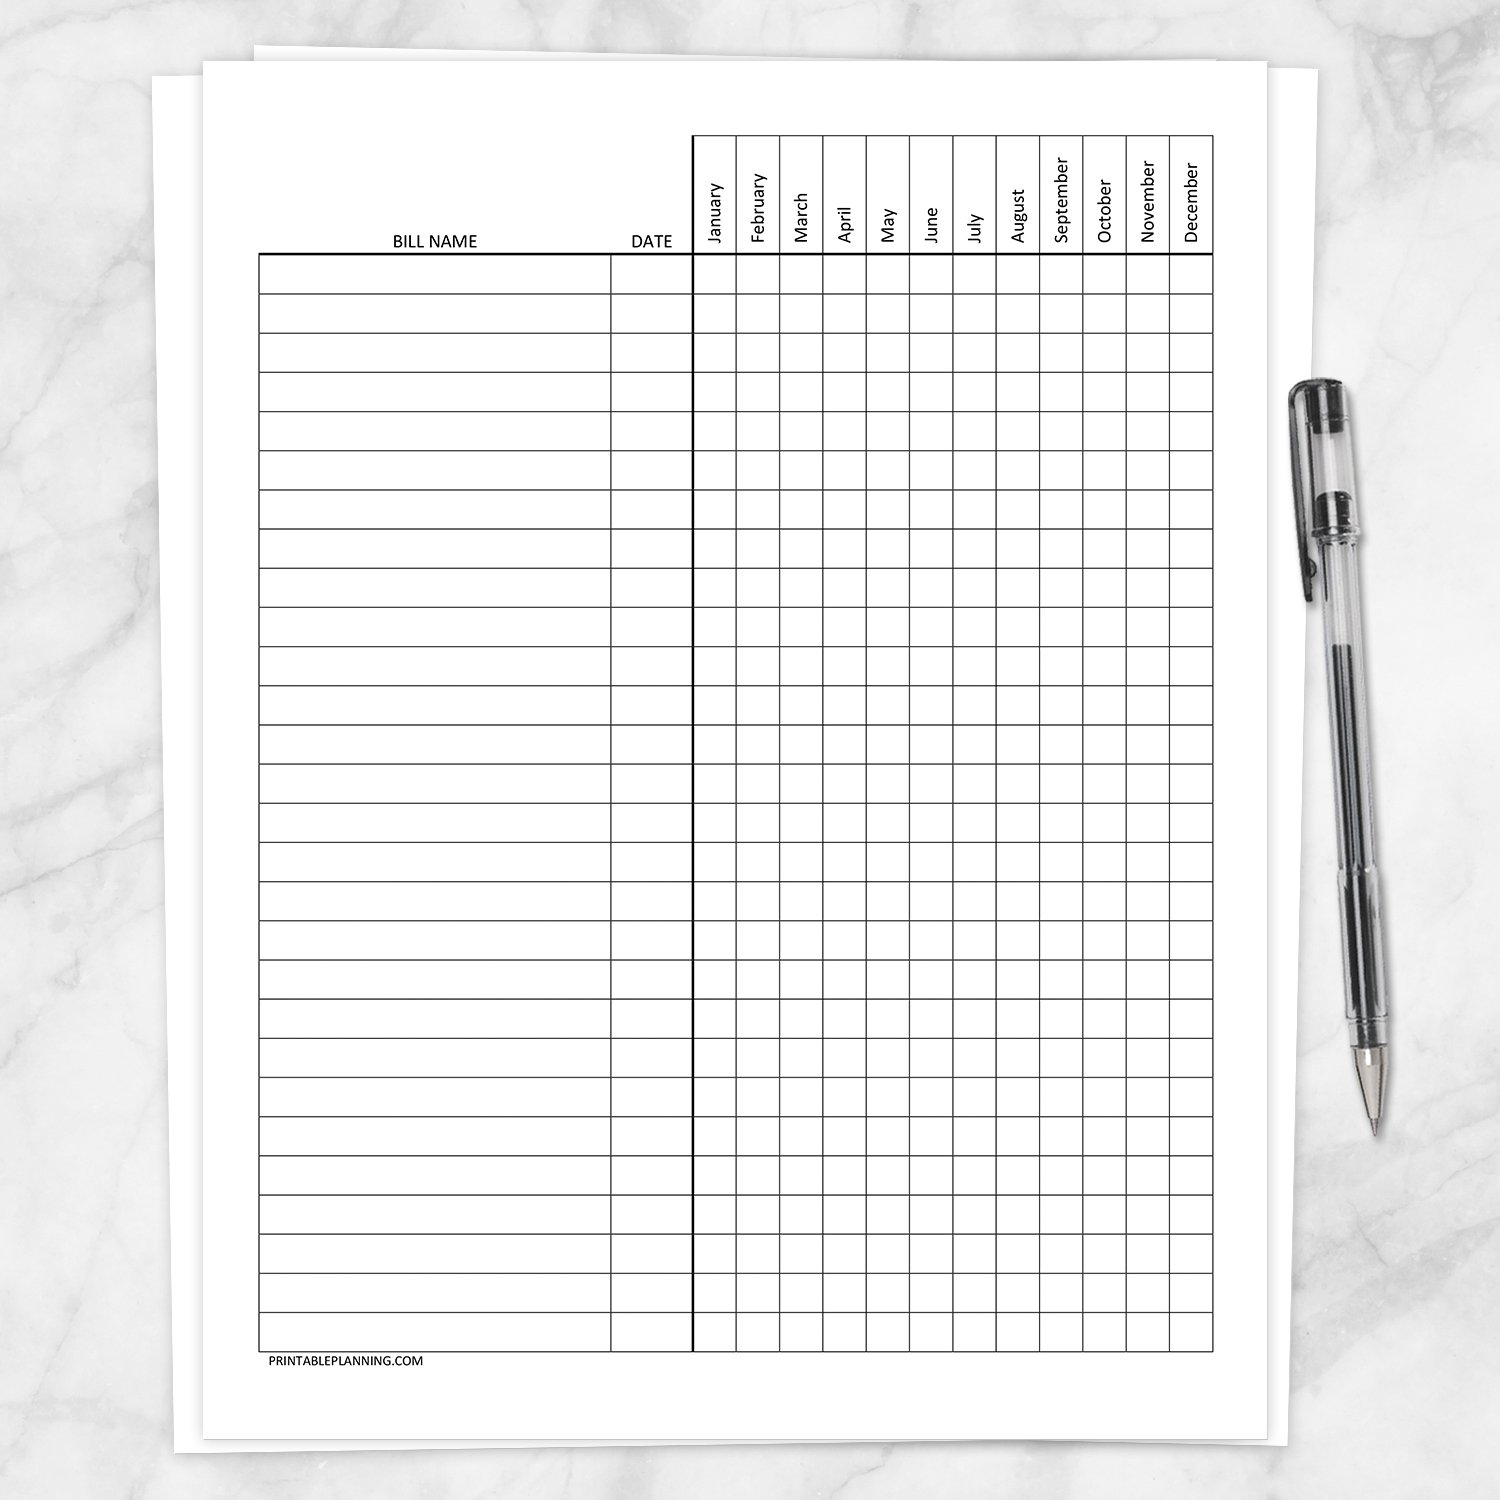 Bill Payment Tracker Log Full Year Printable at Printable Planning